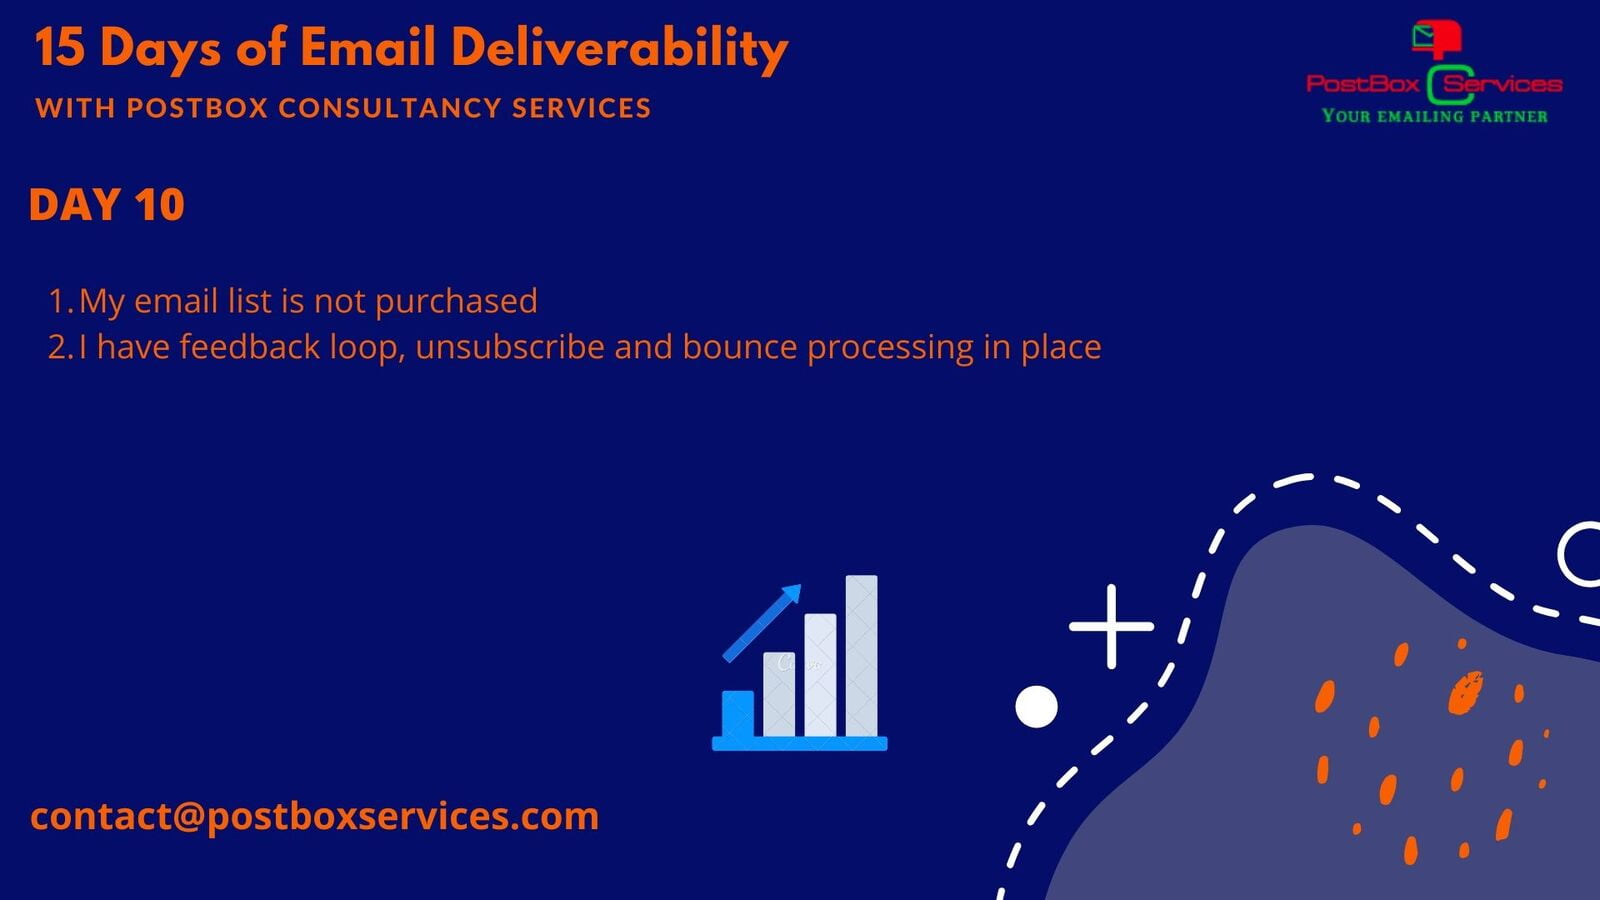 Day 10 Email Deliverability